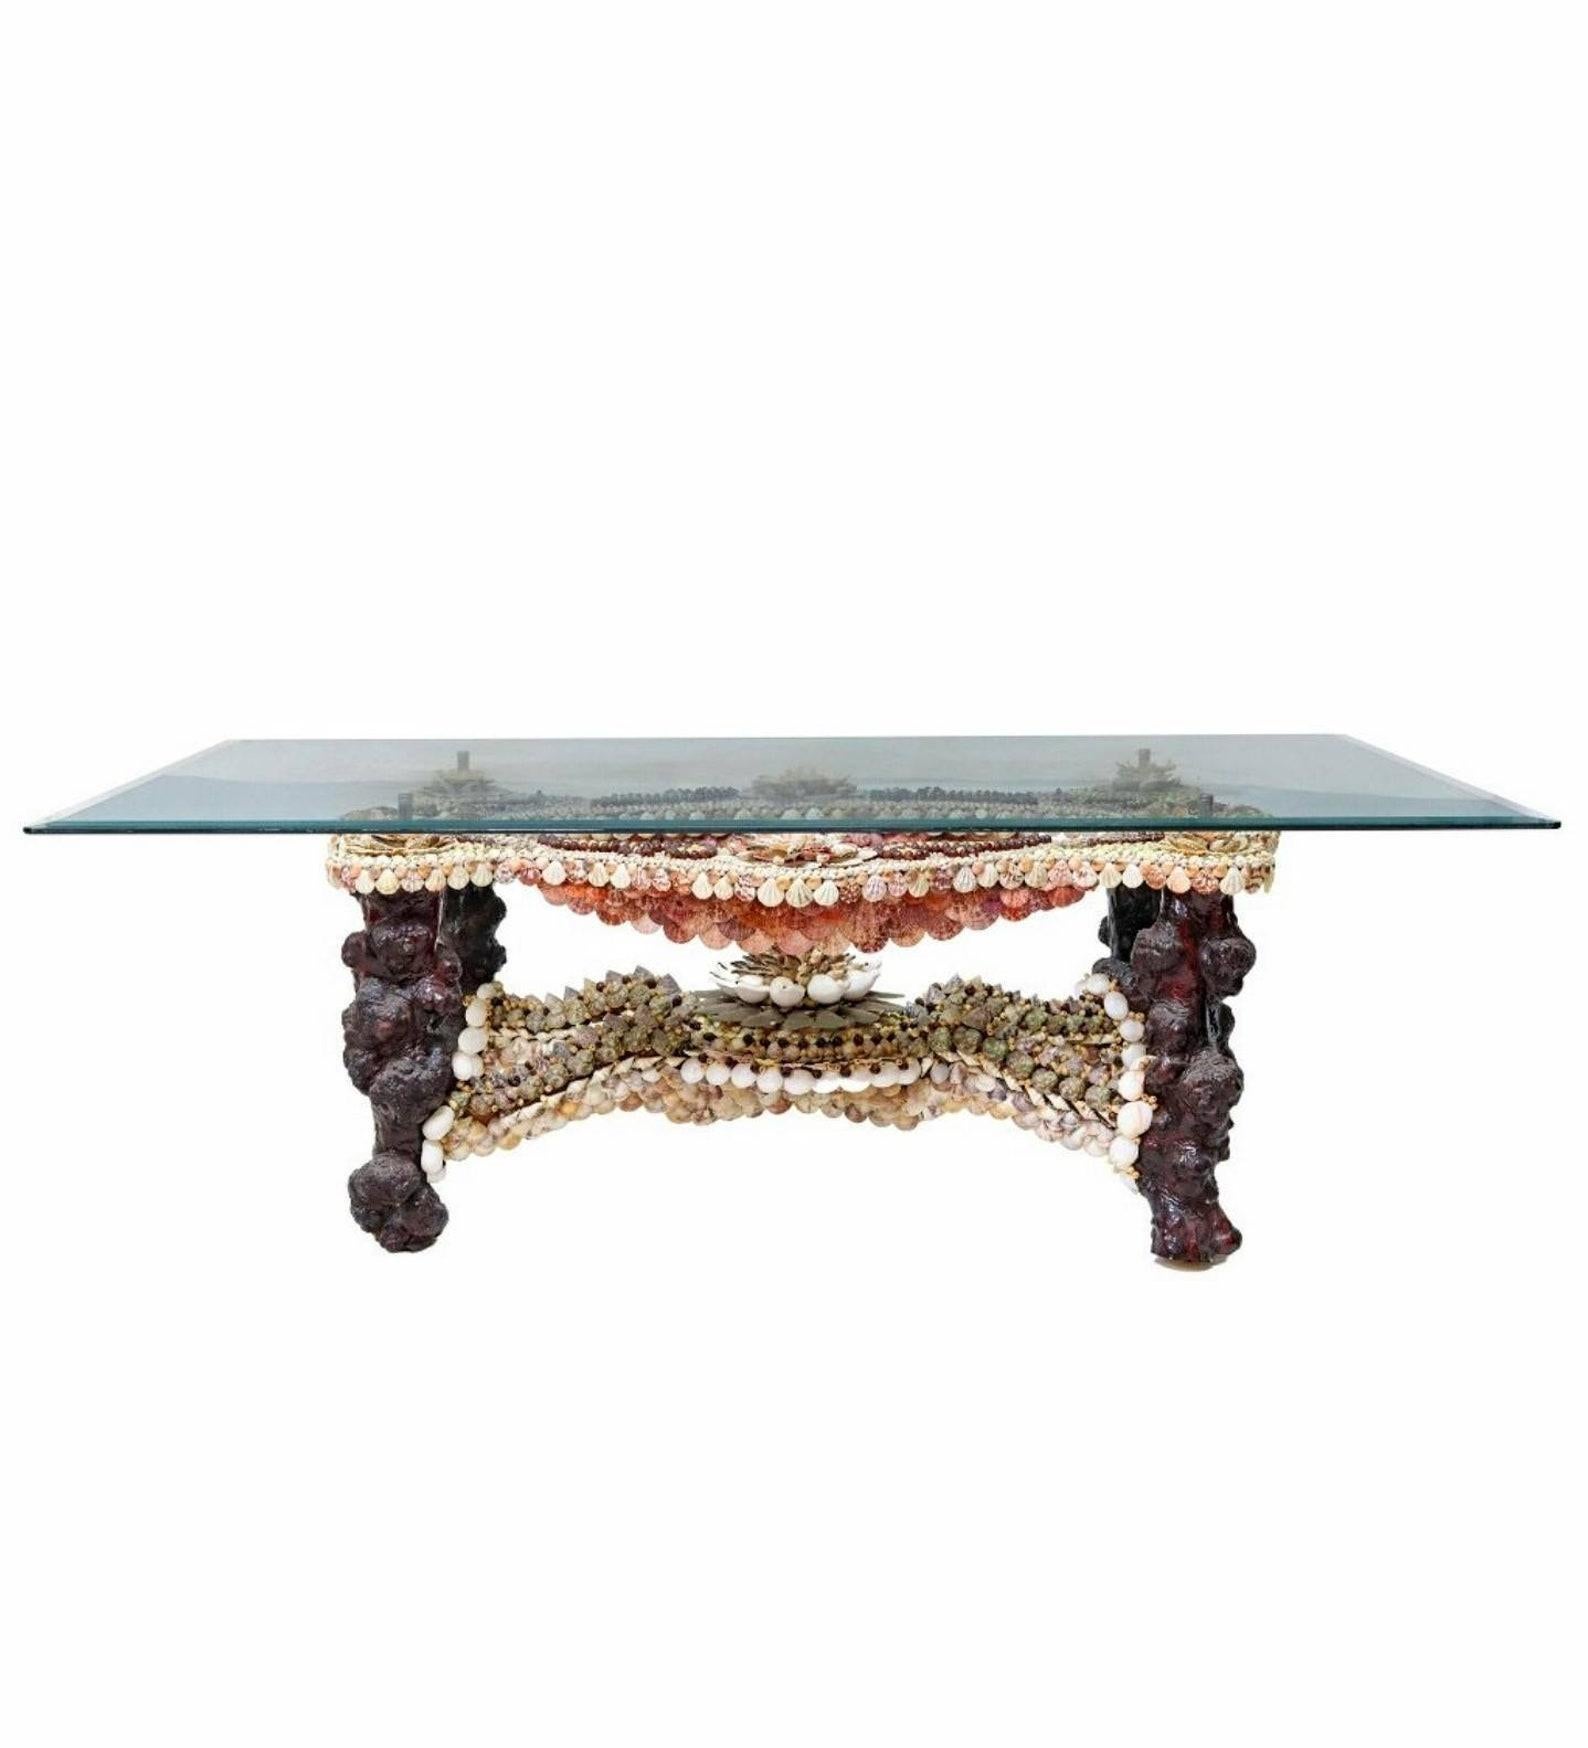 A spectacular shellwork decorated table, artistic one-of-a-kind example, exceptionally executed design in the manner of Anthony Redmile (British, b.1940), dating to the late 20th century, having a rectangular beveled glass top, over stunning